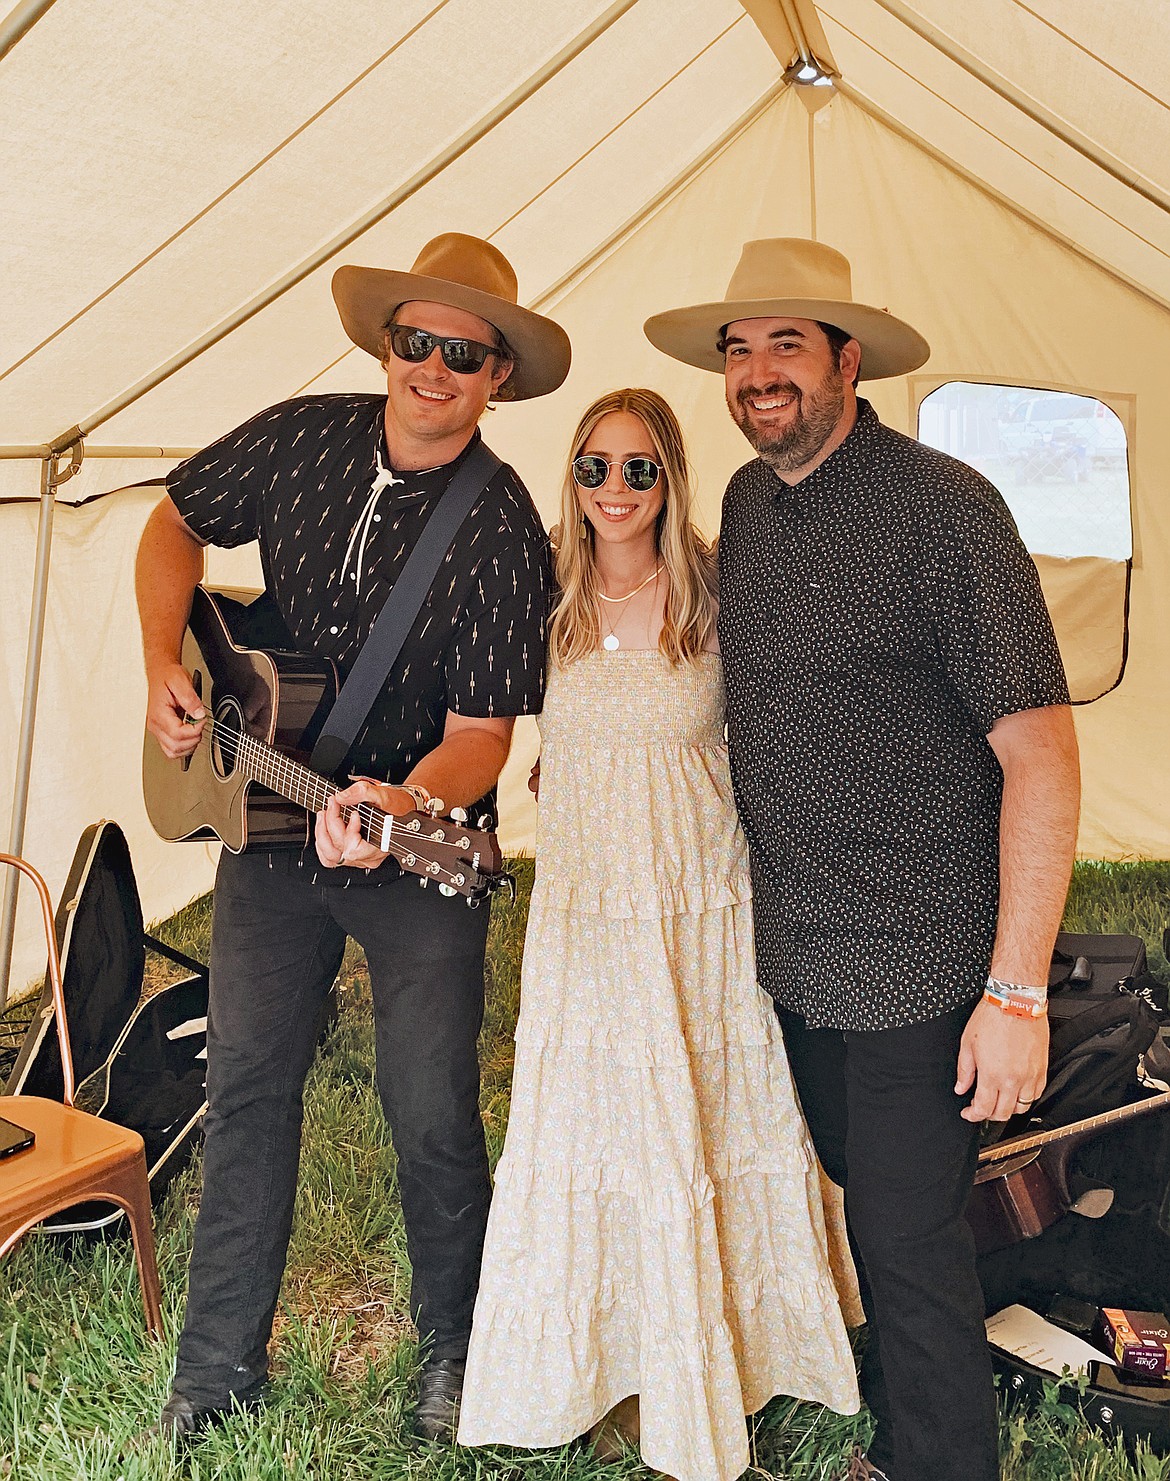 Archertown gets ready to perform at Under the Big Sky Festival in Whitefish. From left to right, Kyle and Natalie Archer, and John Kay. (Courtesy Photo)